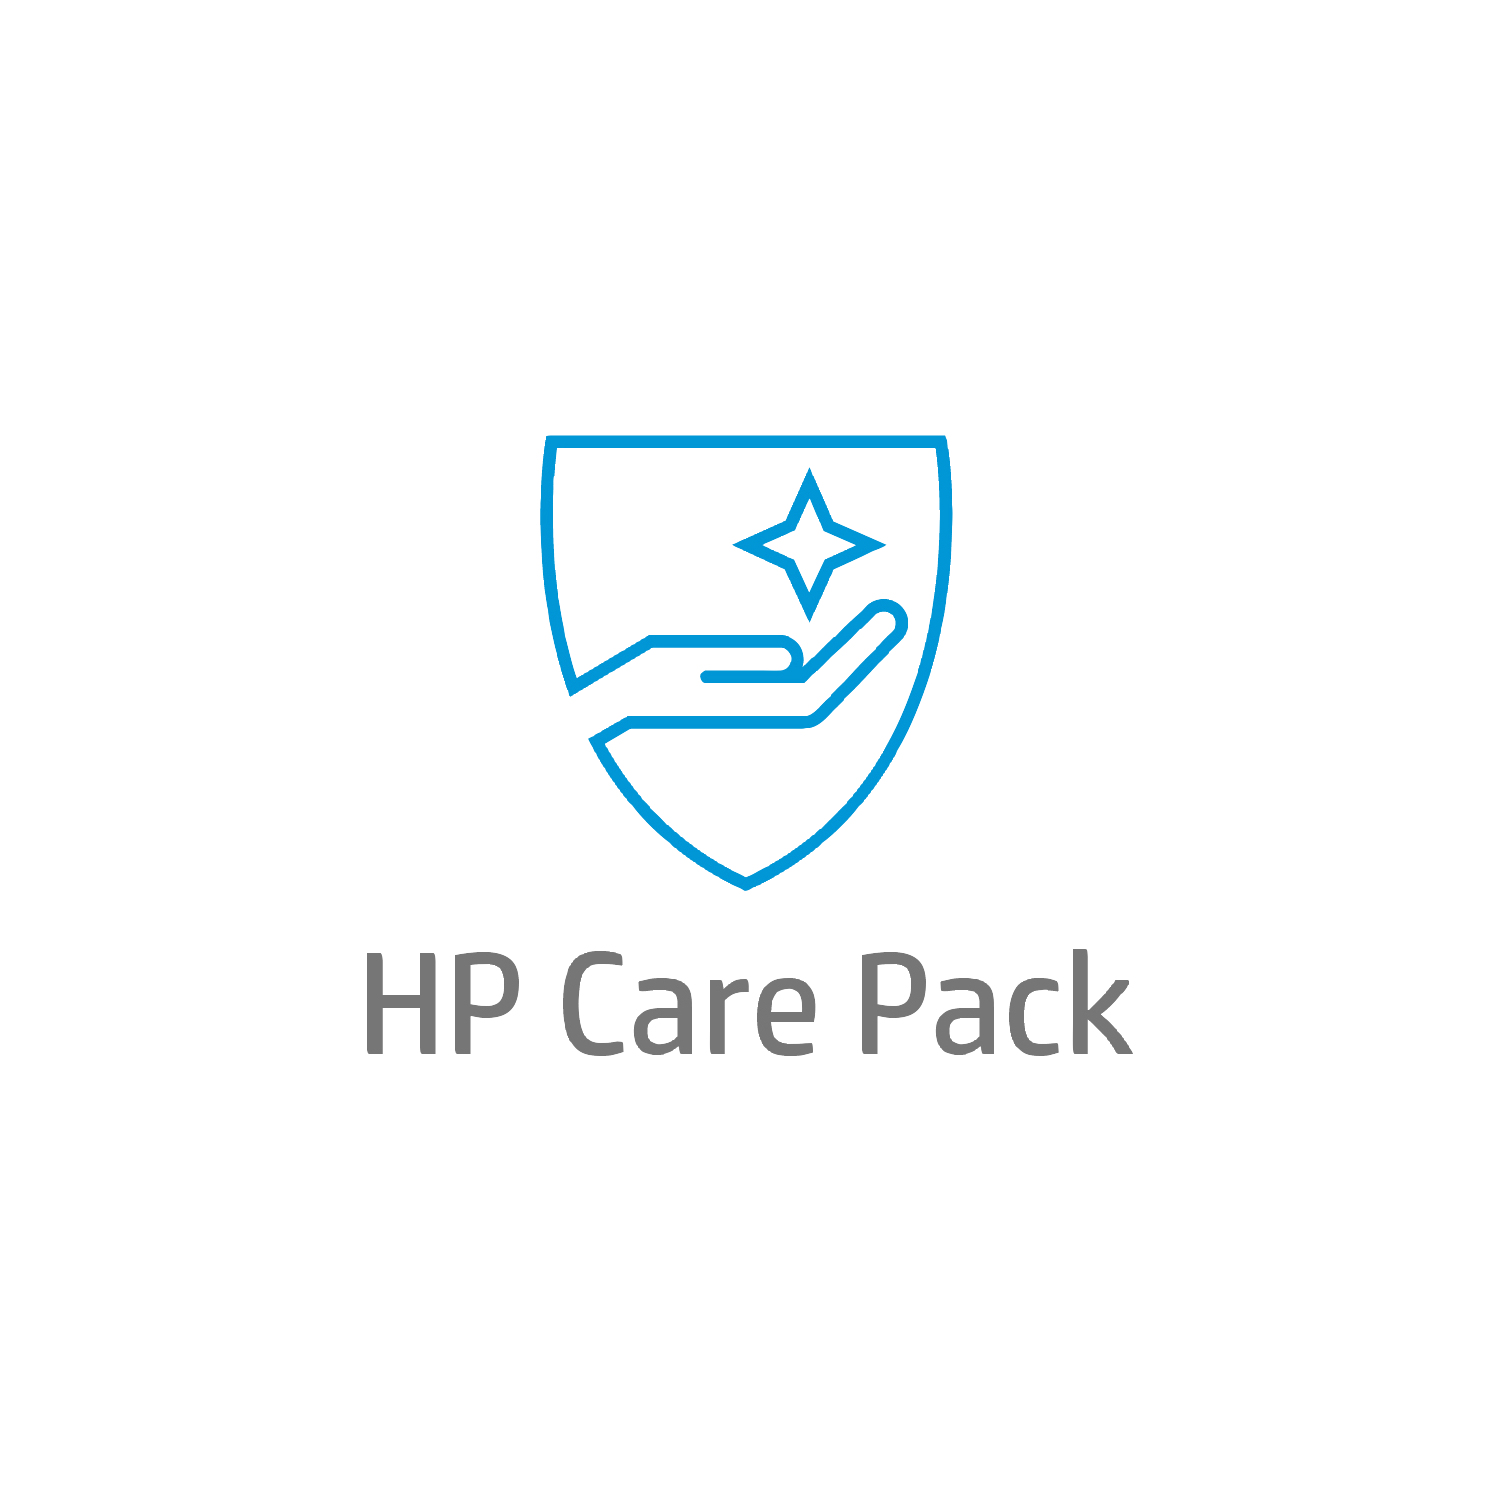 HP 1y 9x5 Workplace 1-99 License Support REQUIRED for each software lic. purchased.